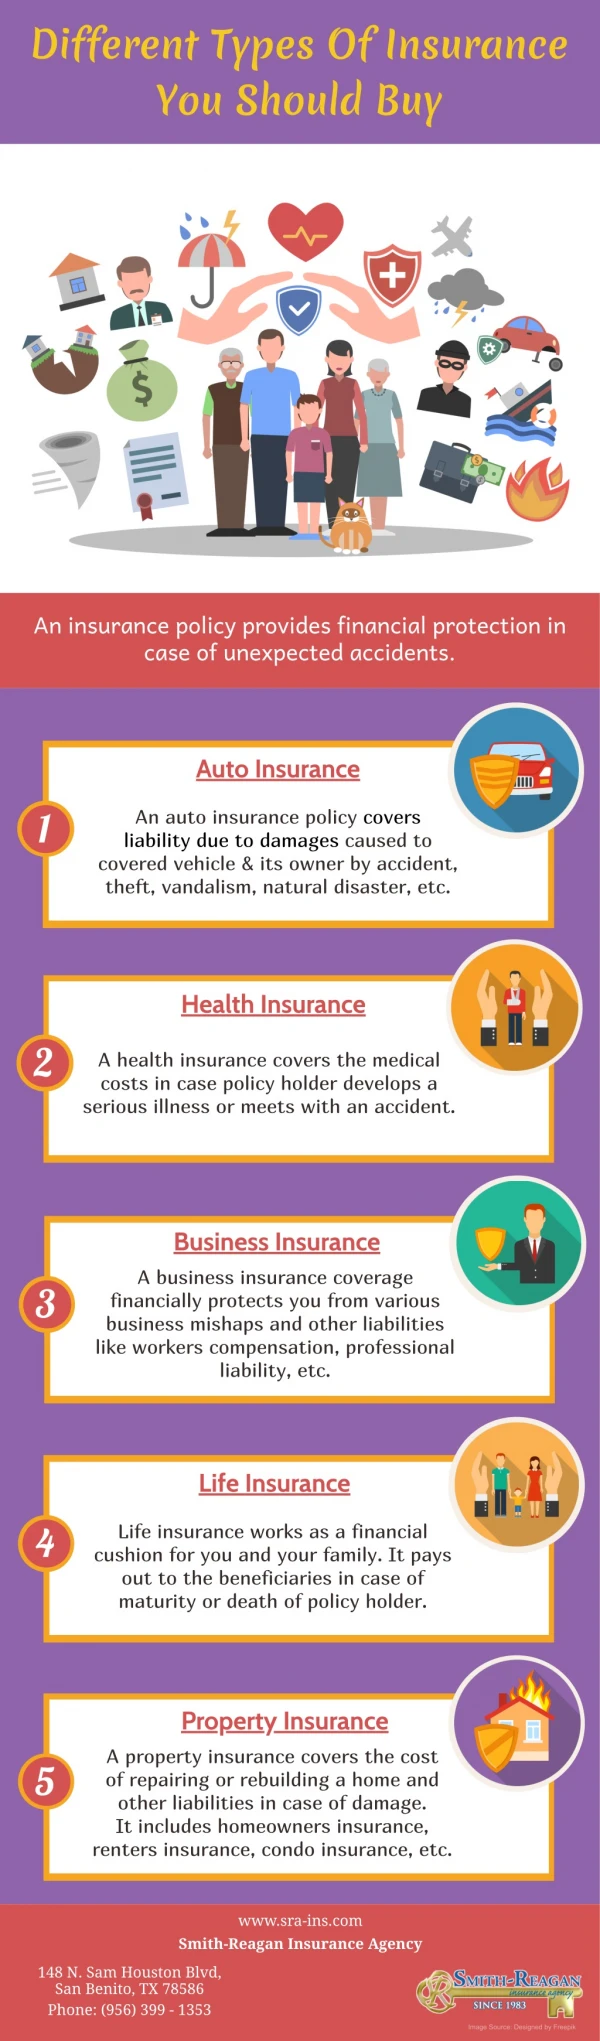 Different Types Of Insurance You Should Buy